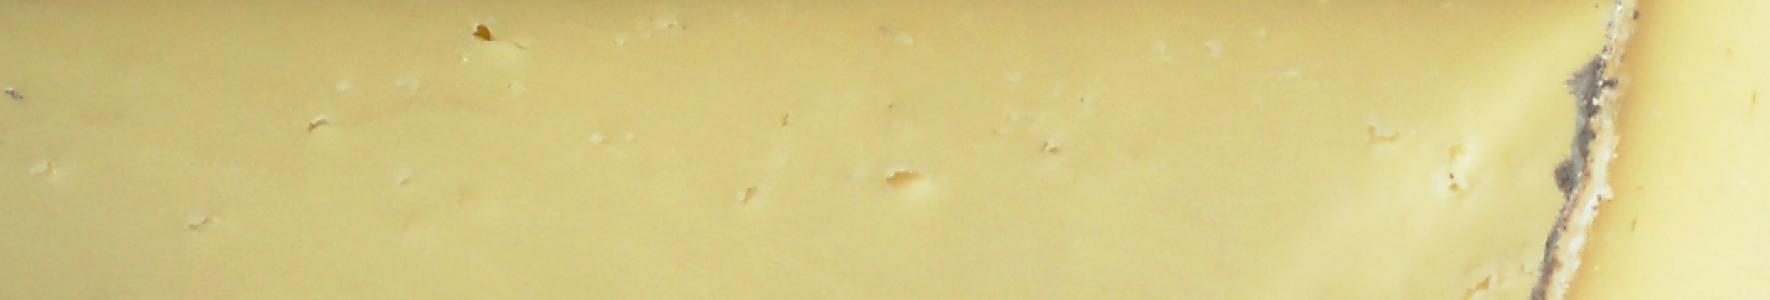 Cheddar & territorial style cheese